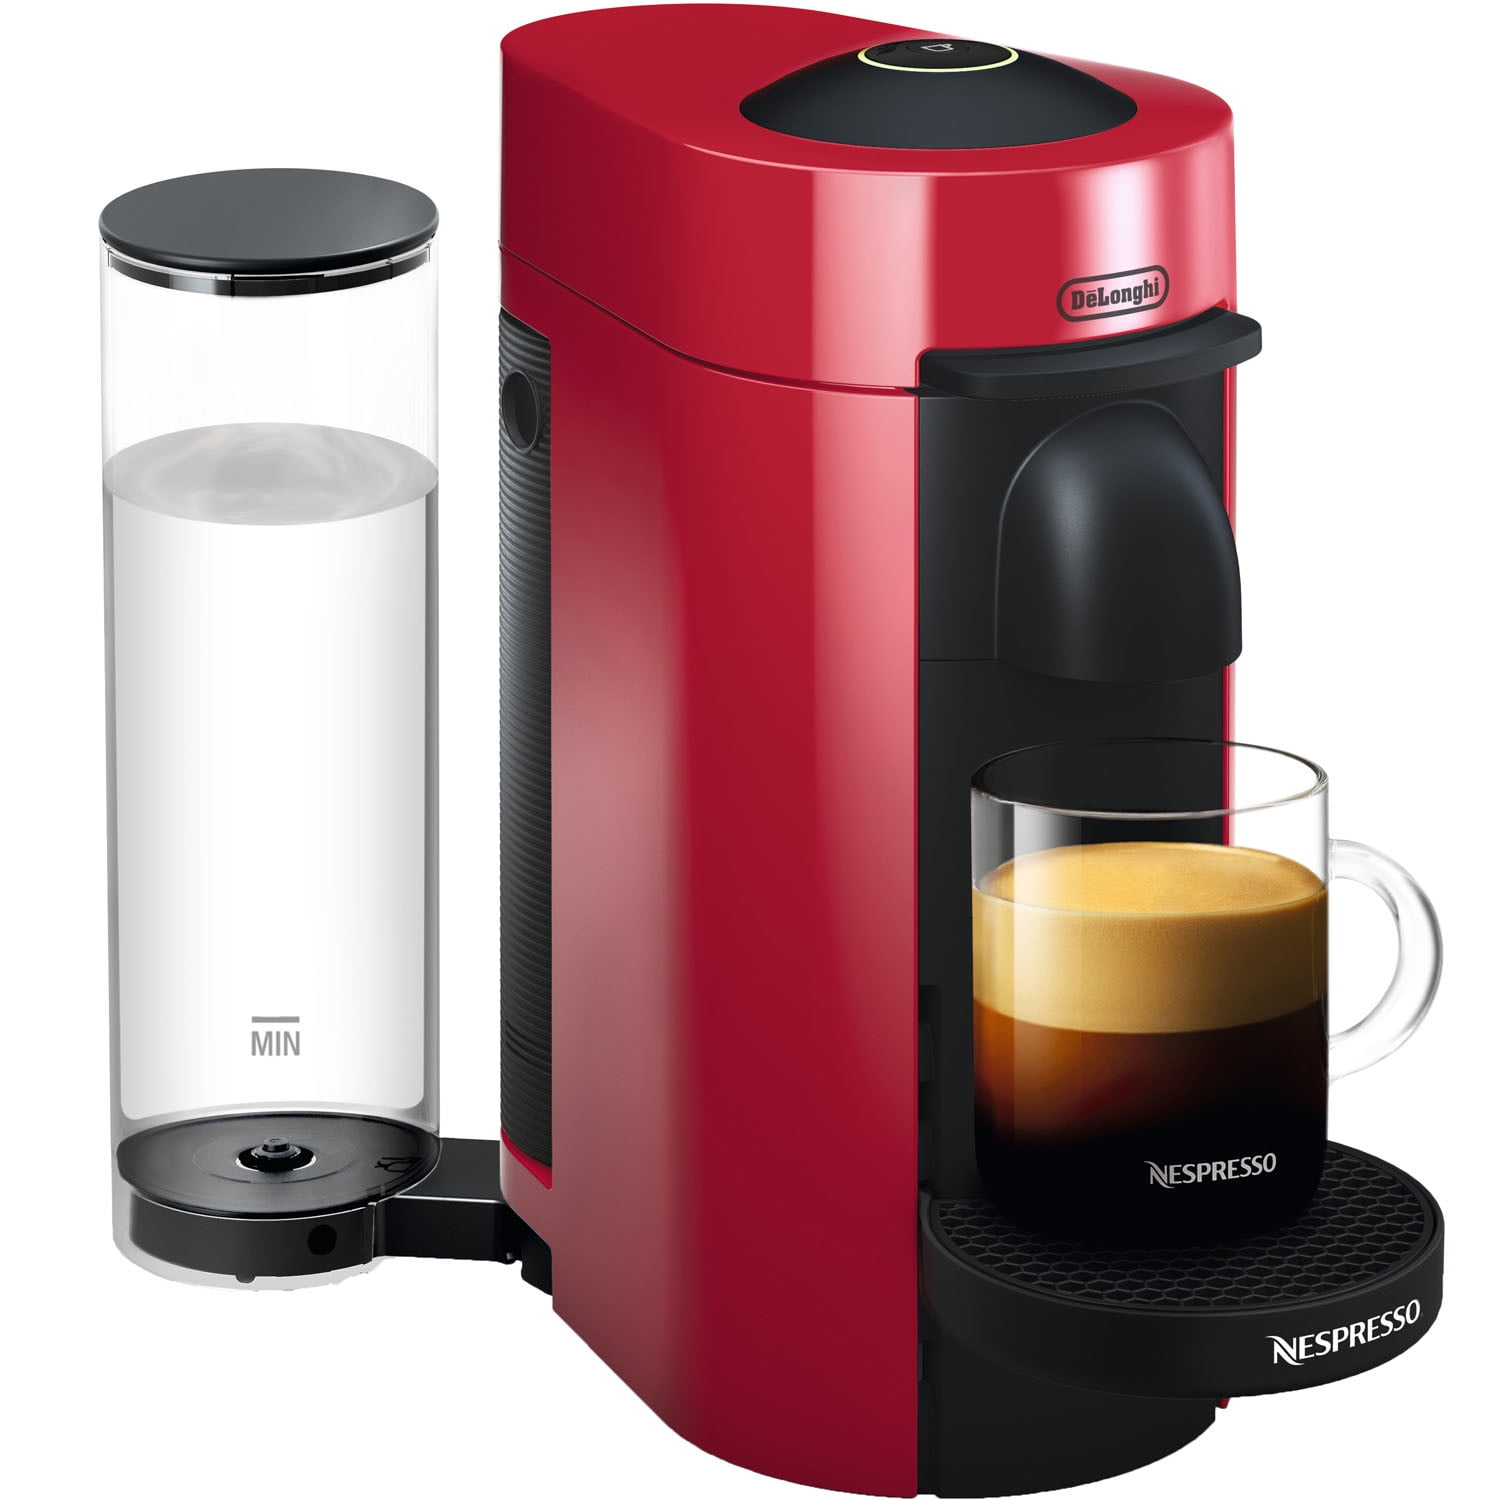 Nespresso ENV150R Vertuoplus Coffee and Espresso Maker by De'longhi Red for sale online 